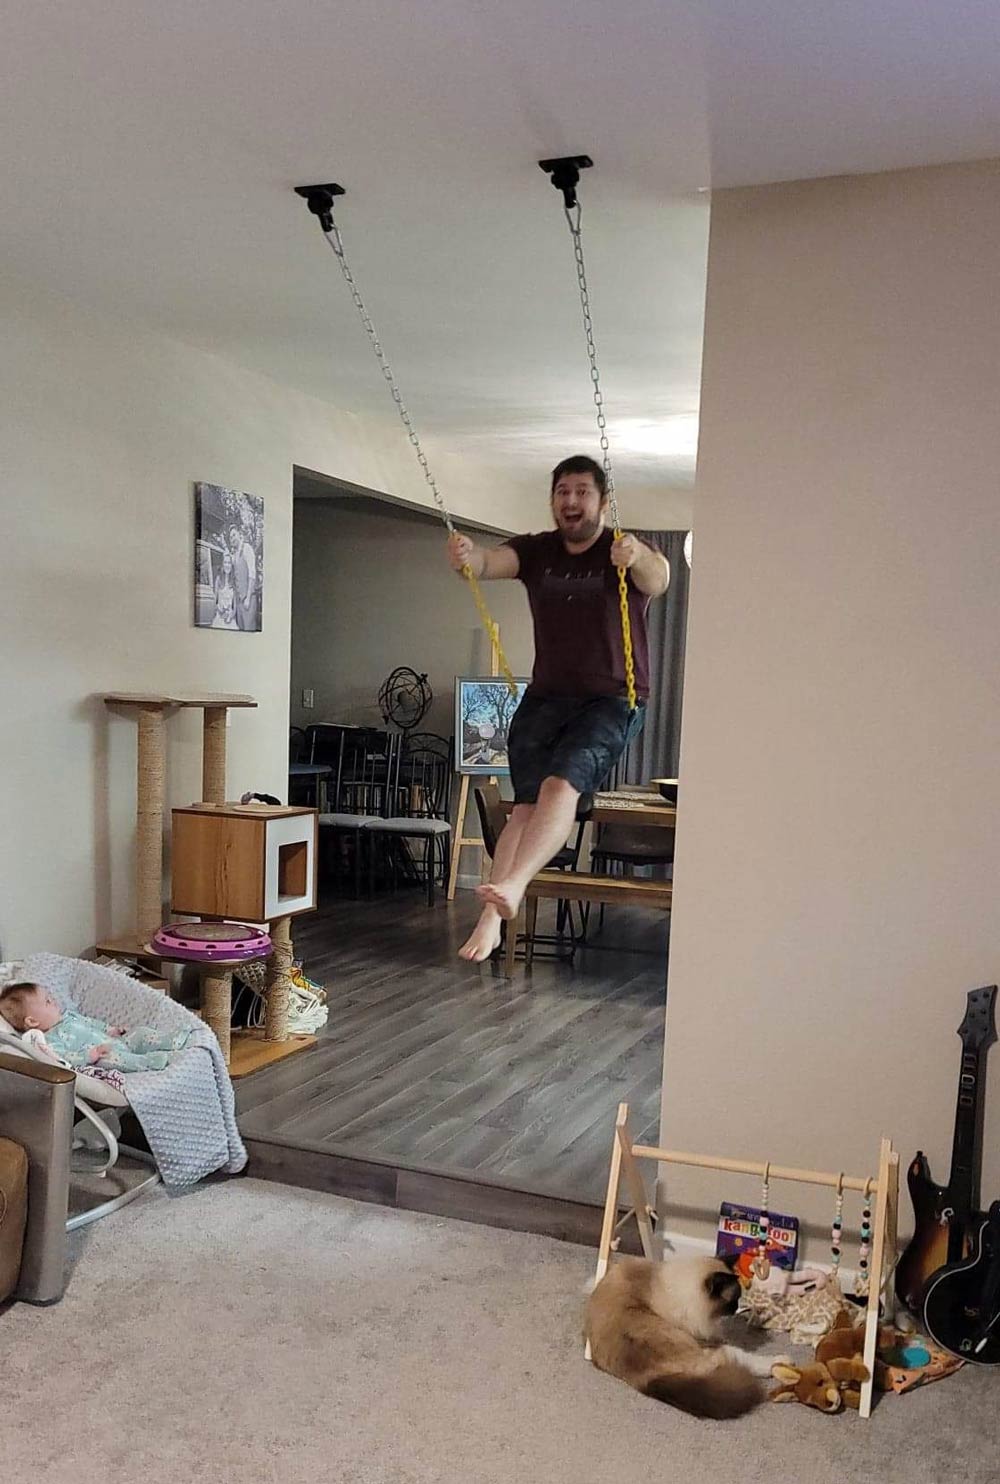 Purchased a house, first thing we did was install an adult swing!